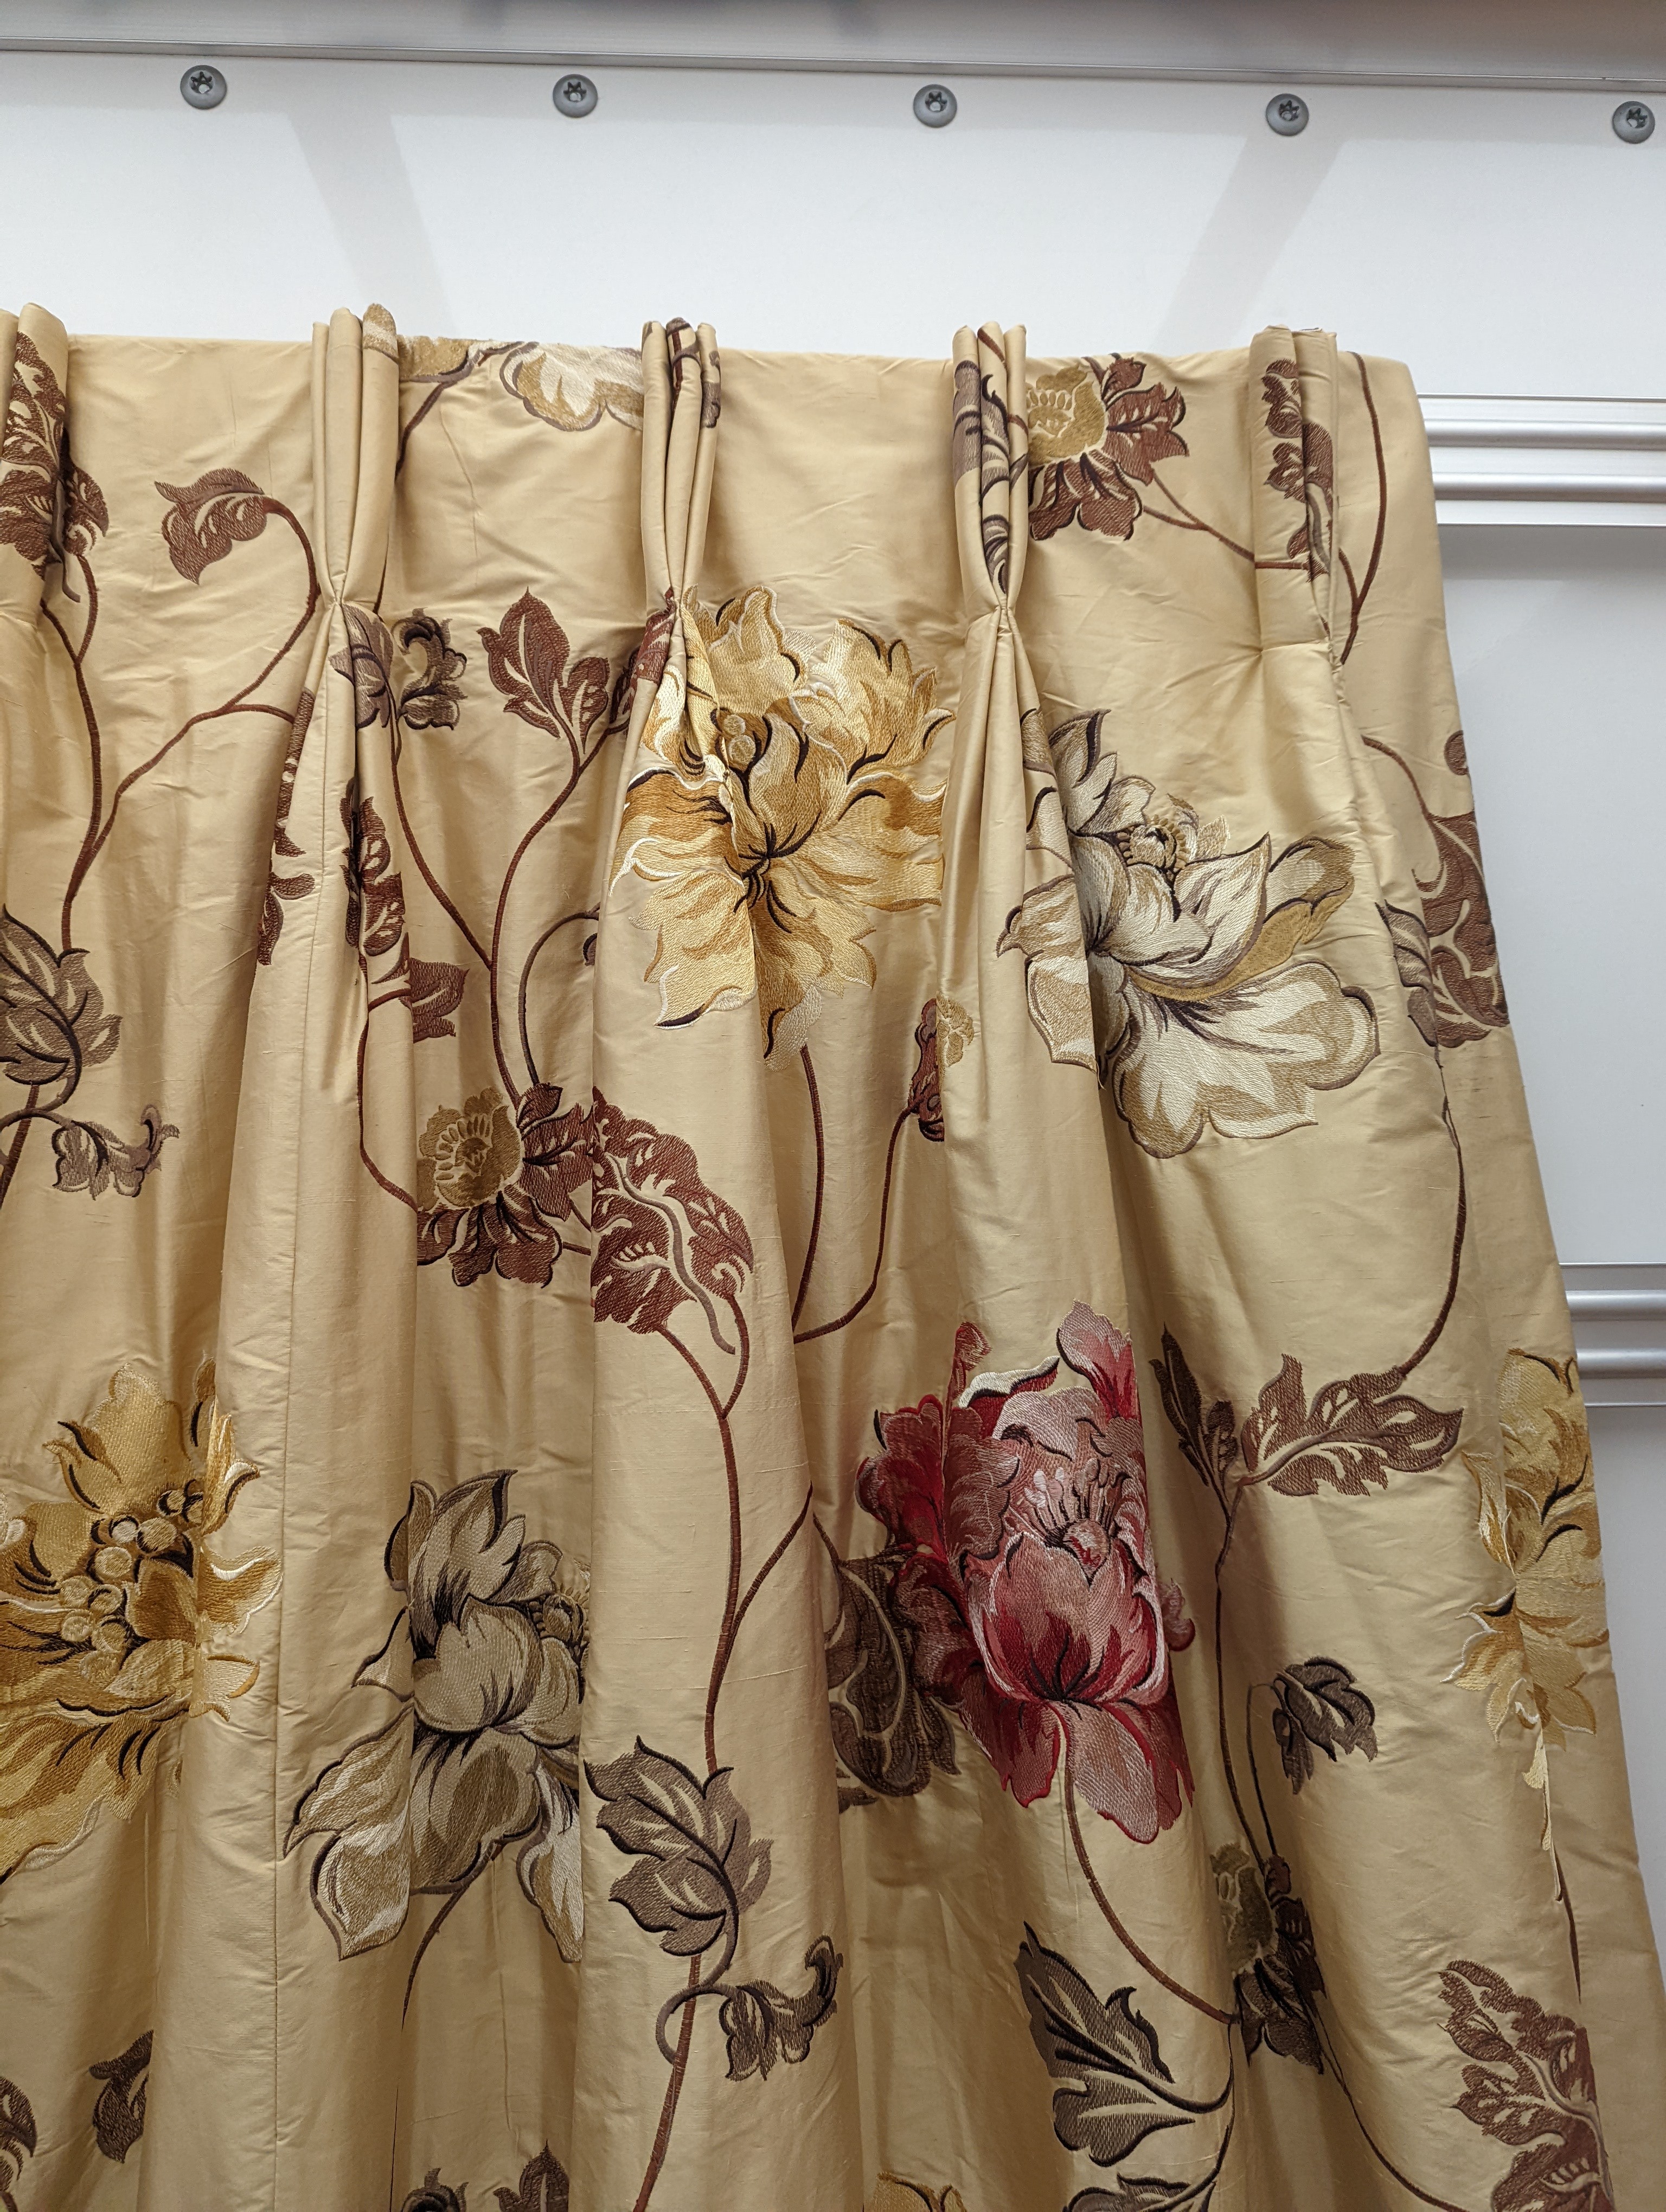 A pair of floral lined curtains. Approximate measurements: Width of top 110cm, Width of bottom 220cm Length 250cm